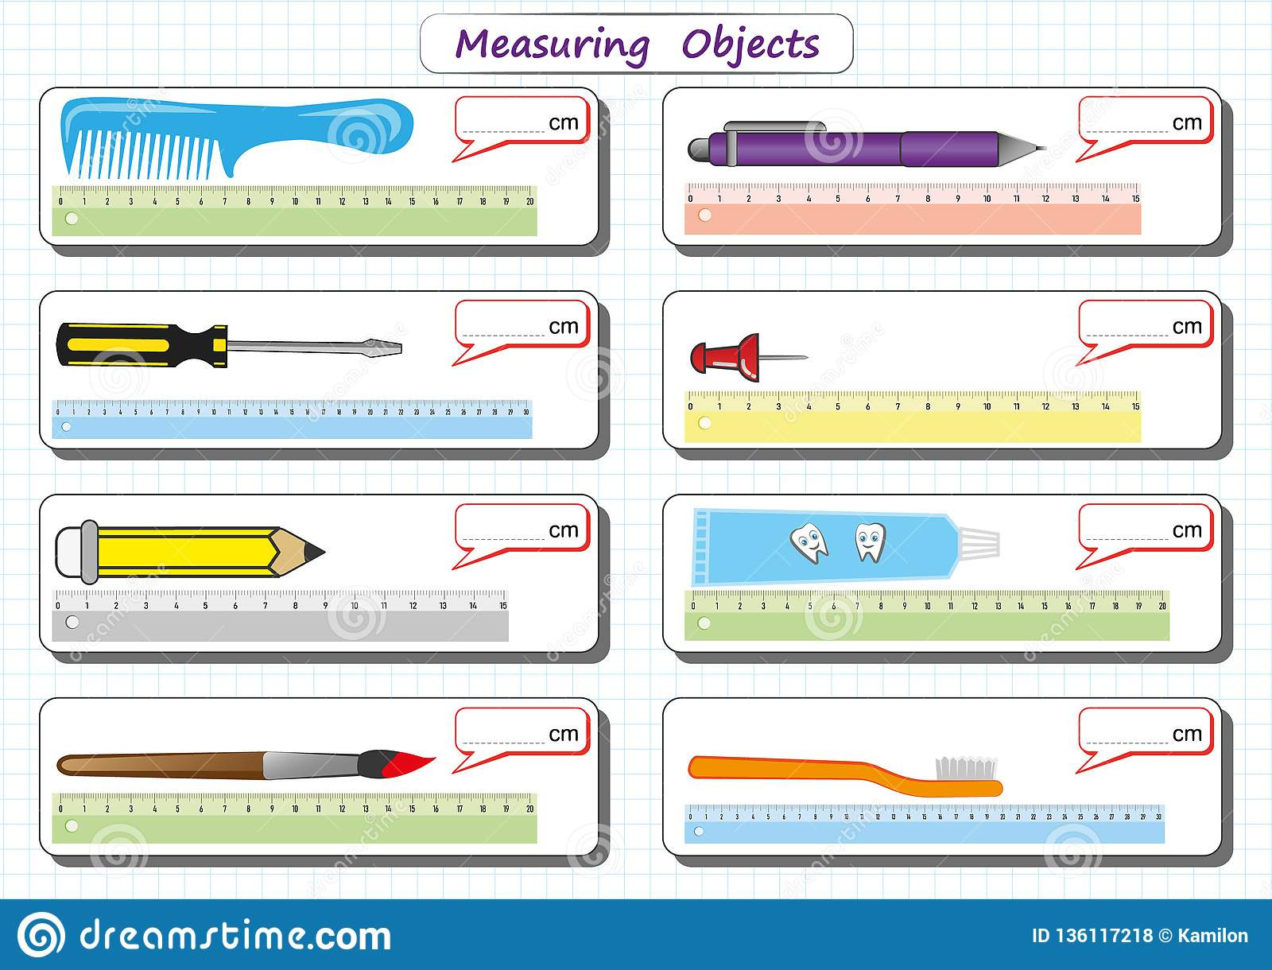 Measuring Length Of The Objects With Ruler Worksheet For — db-excel.com